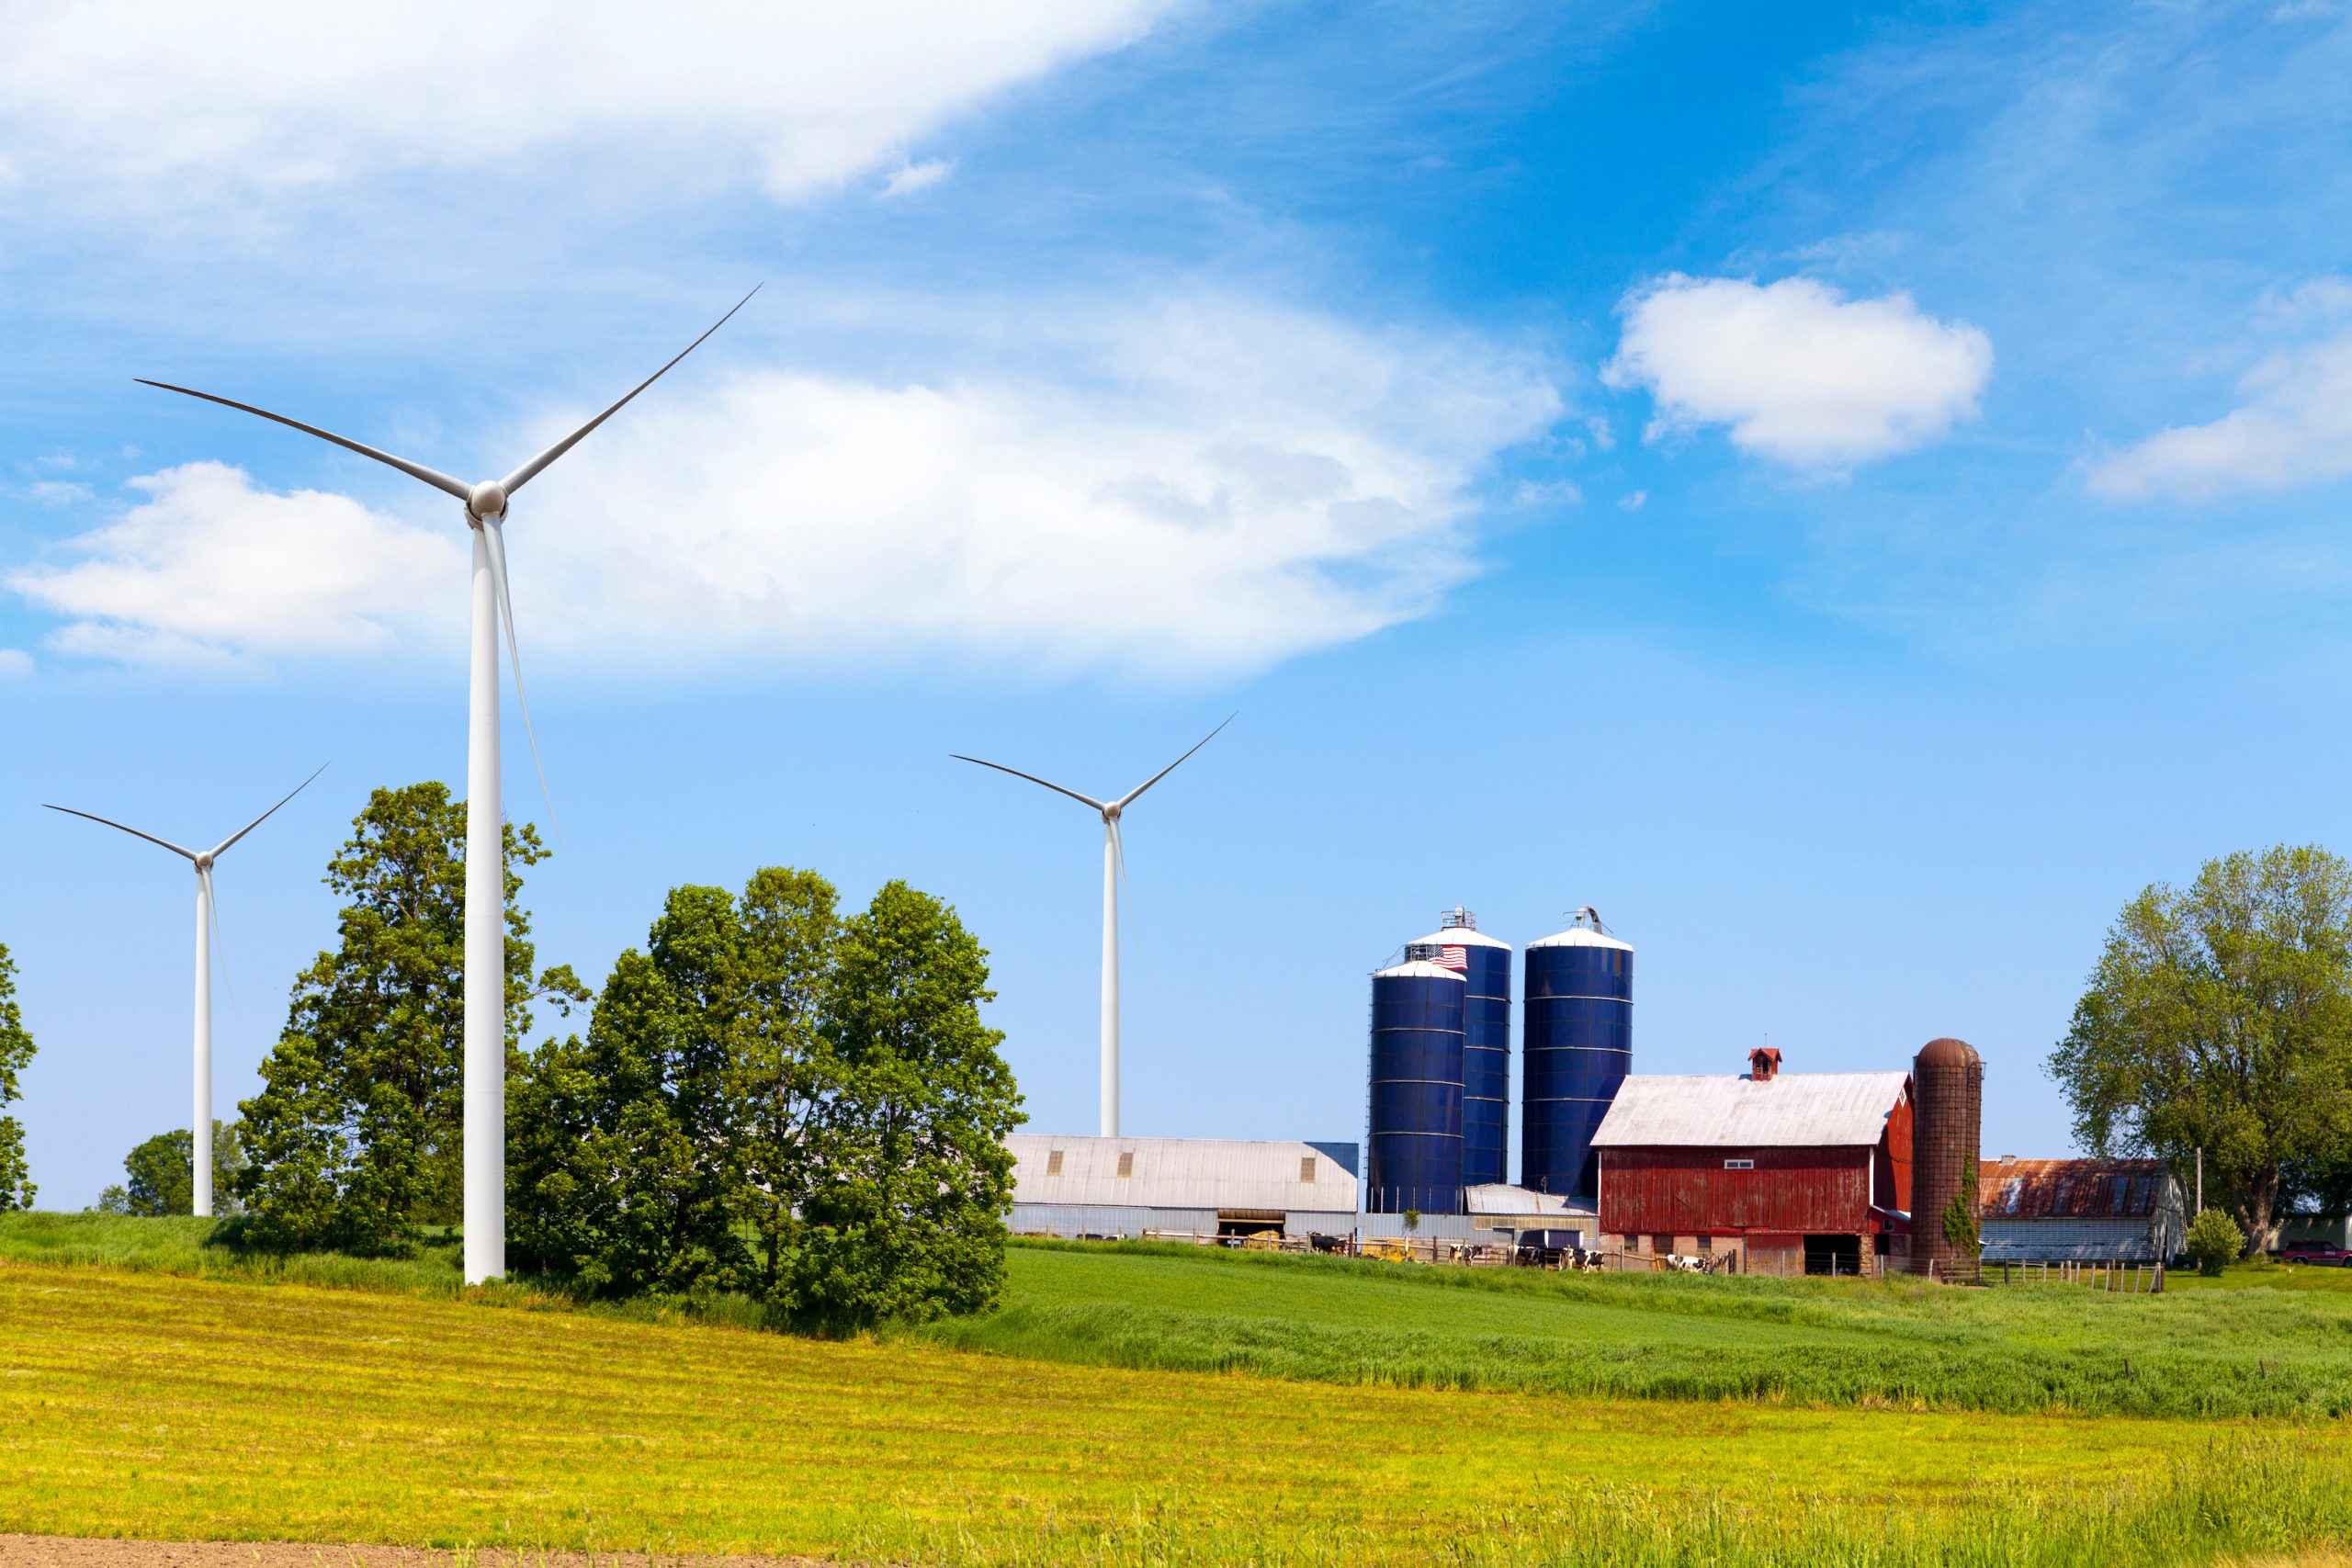 Wind and solar emerge as cheapest options for powering Wisconsin